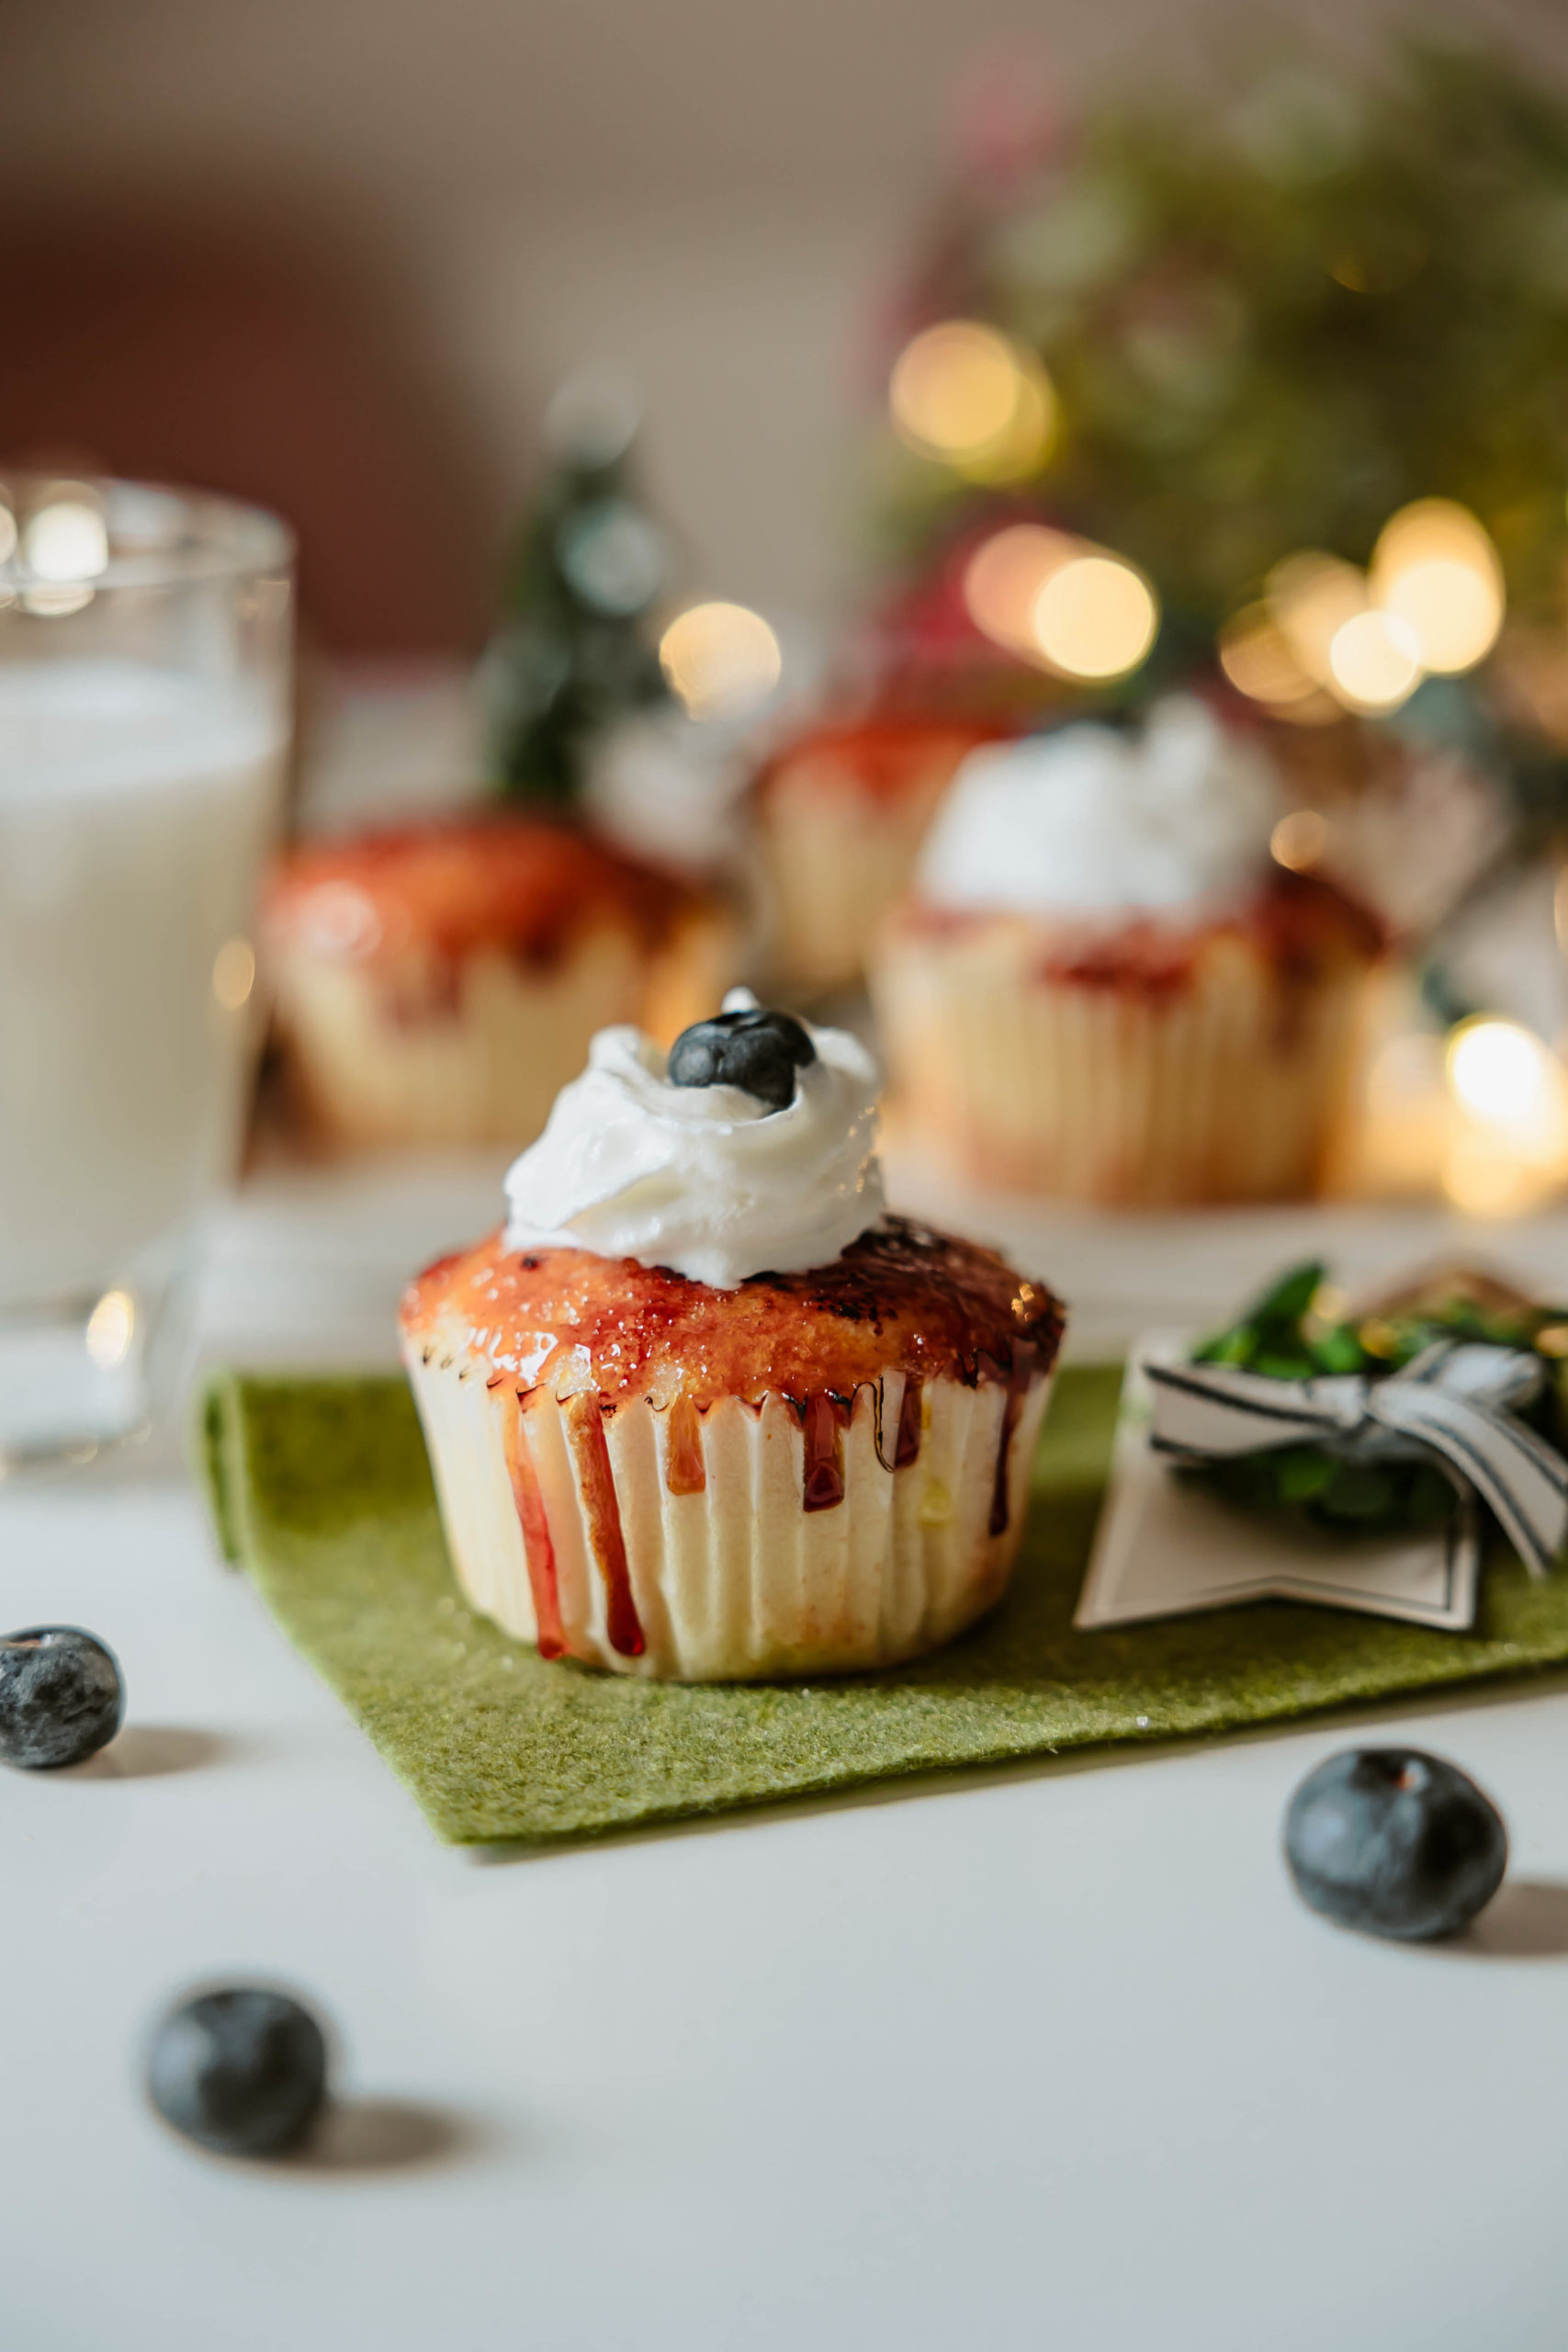 Creme Brulee Cupcakes are the perfect dessert for people who love unique treats that aren’t overly sweet. Easy to make too!